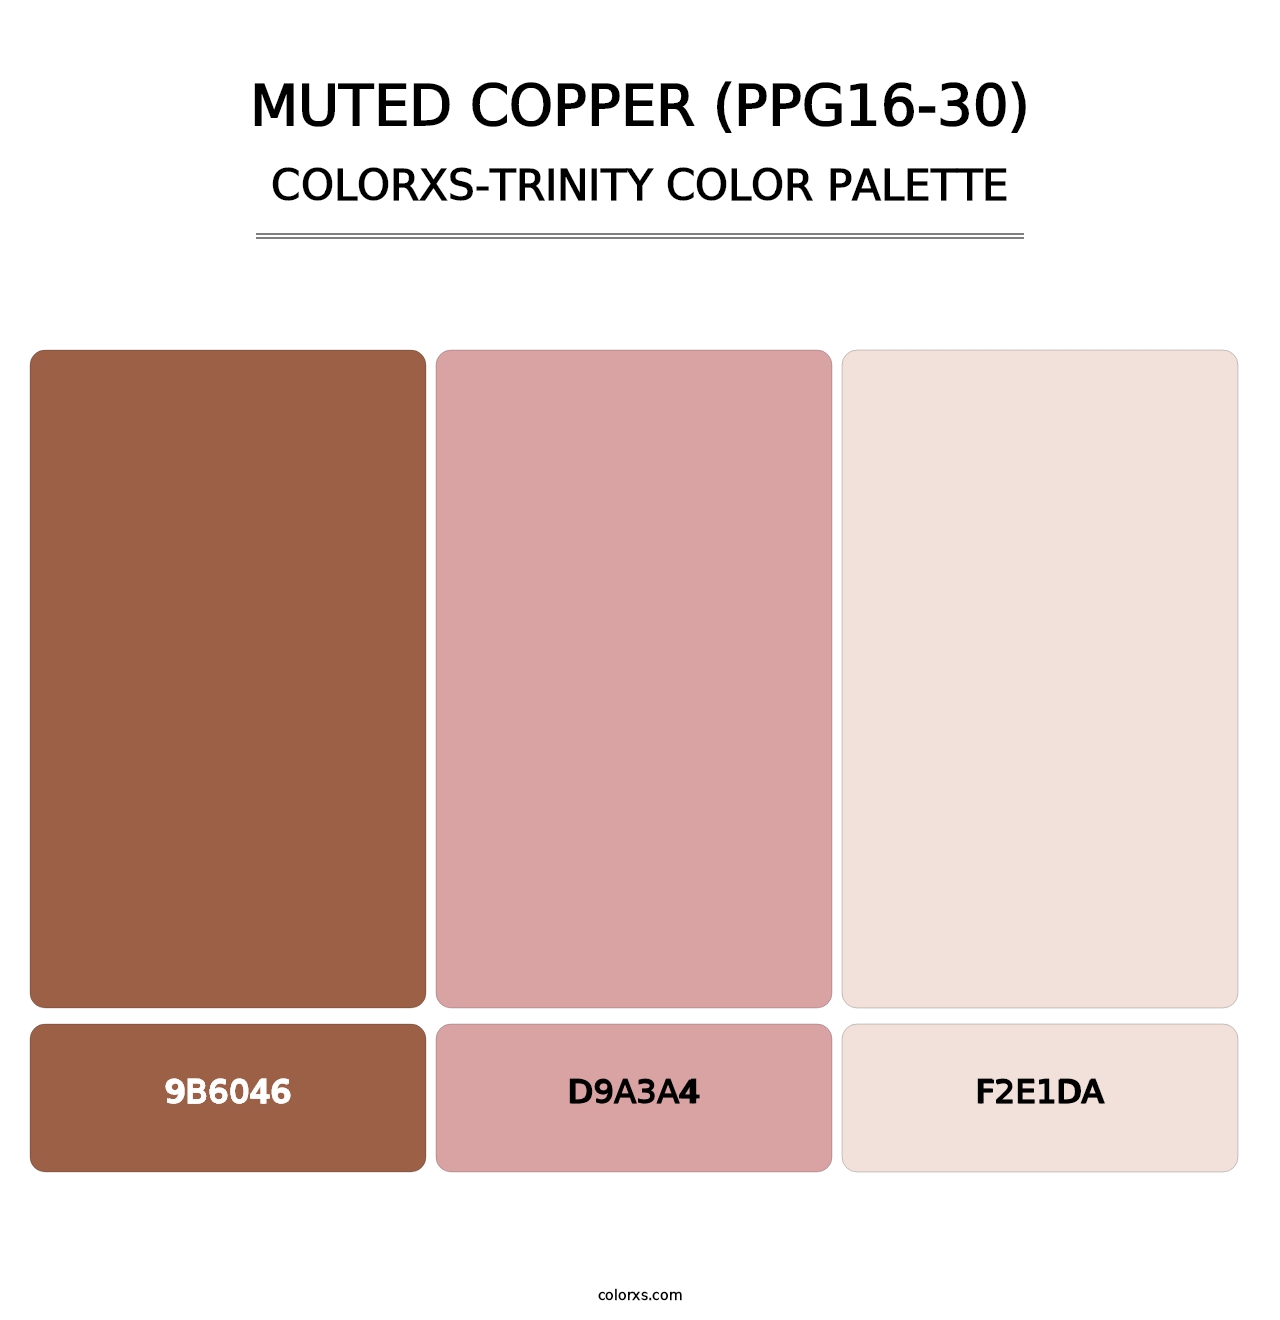 Muted Copper (PPG16-30) - Colorxs Trinity Palette